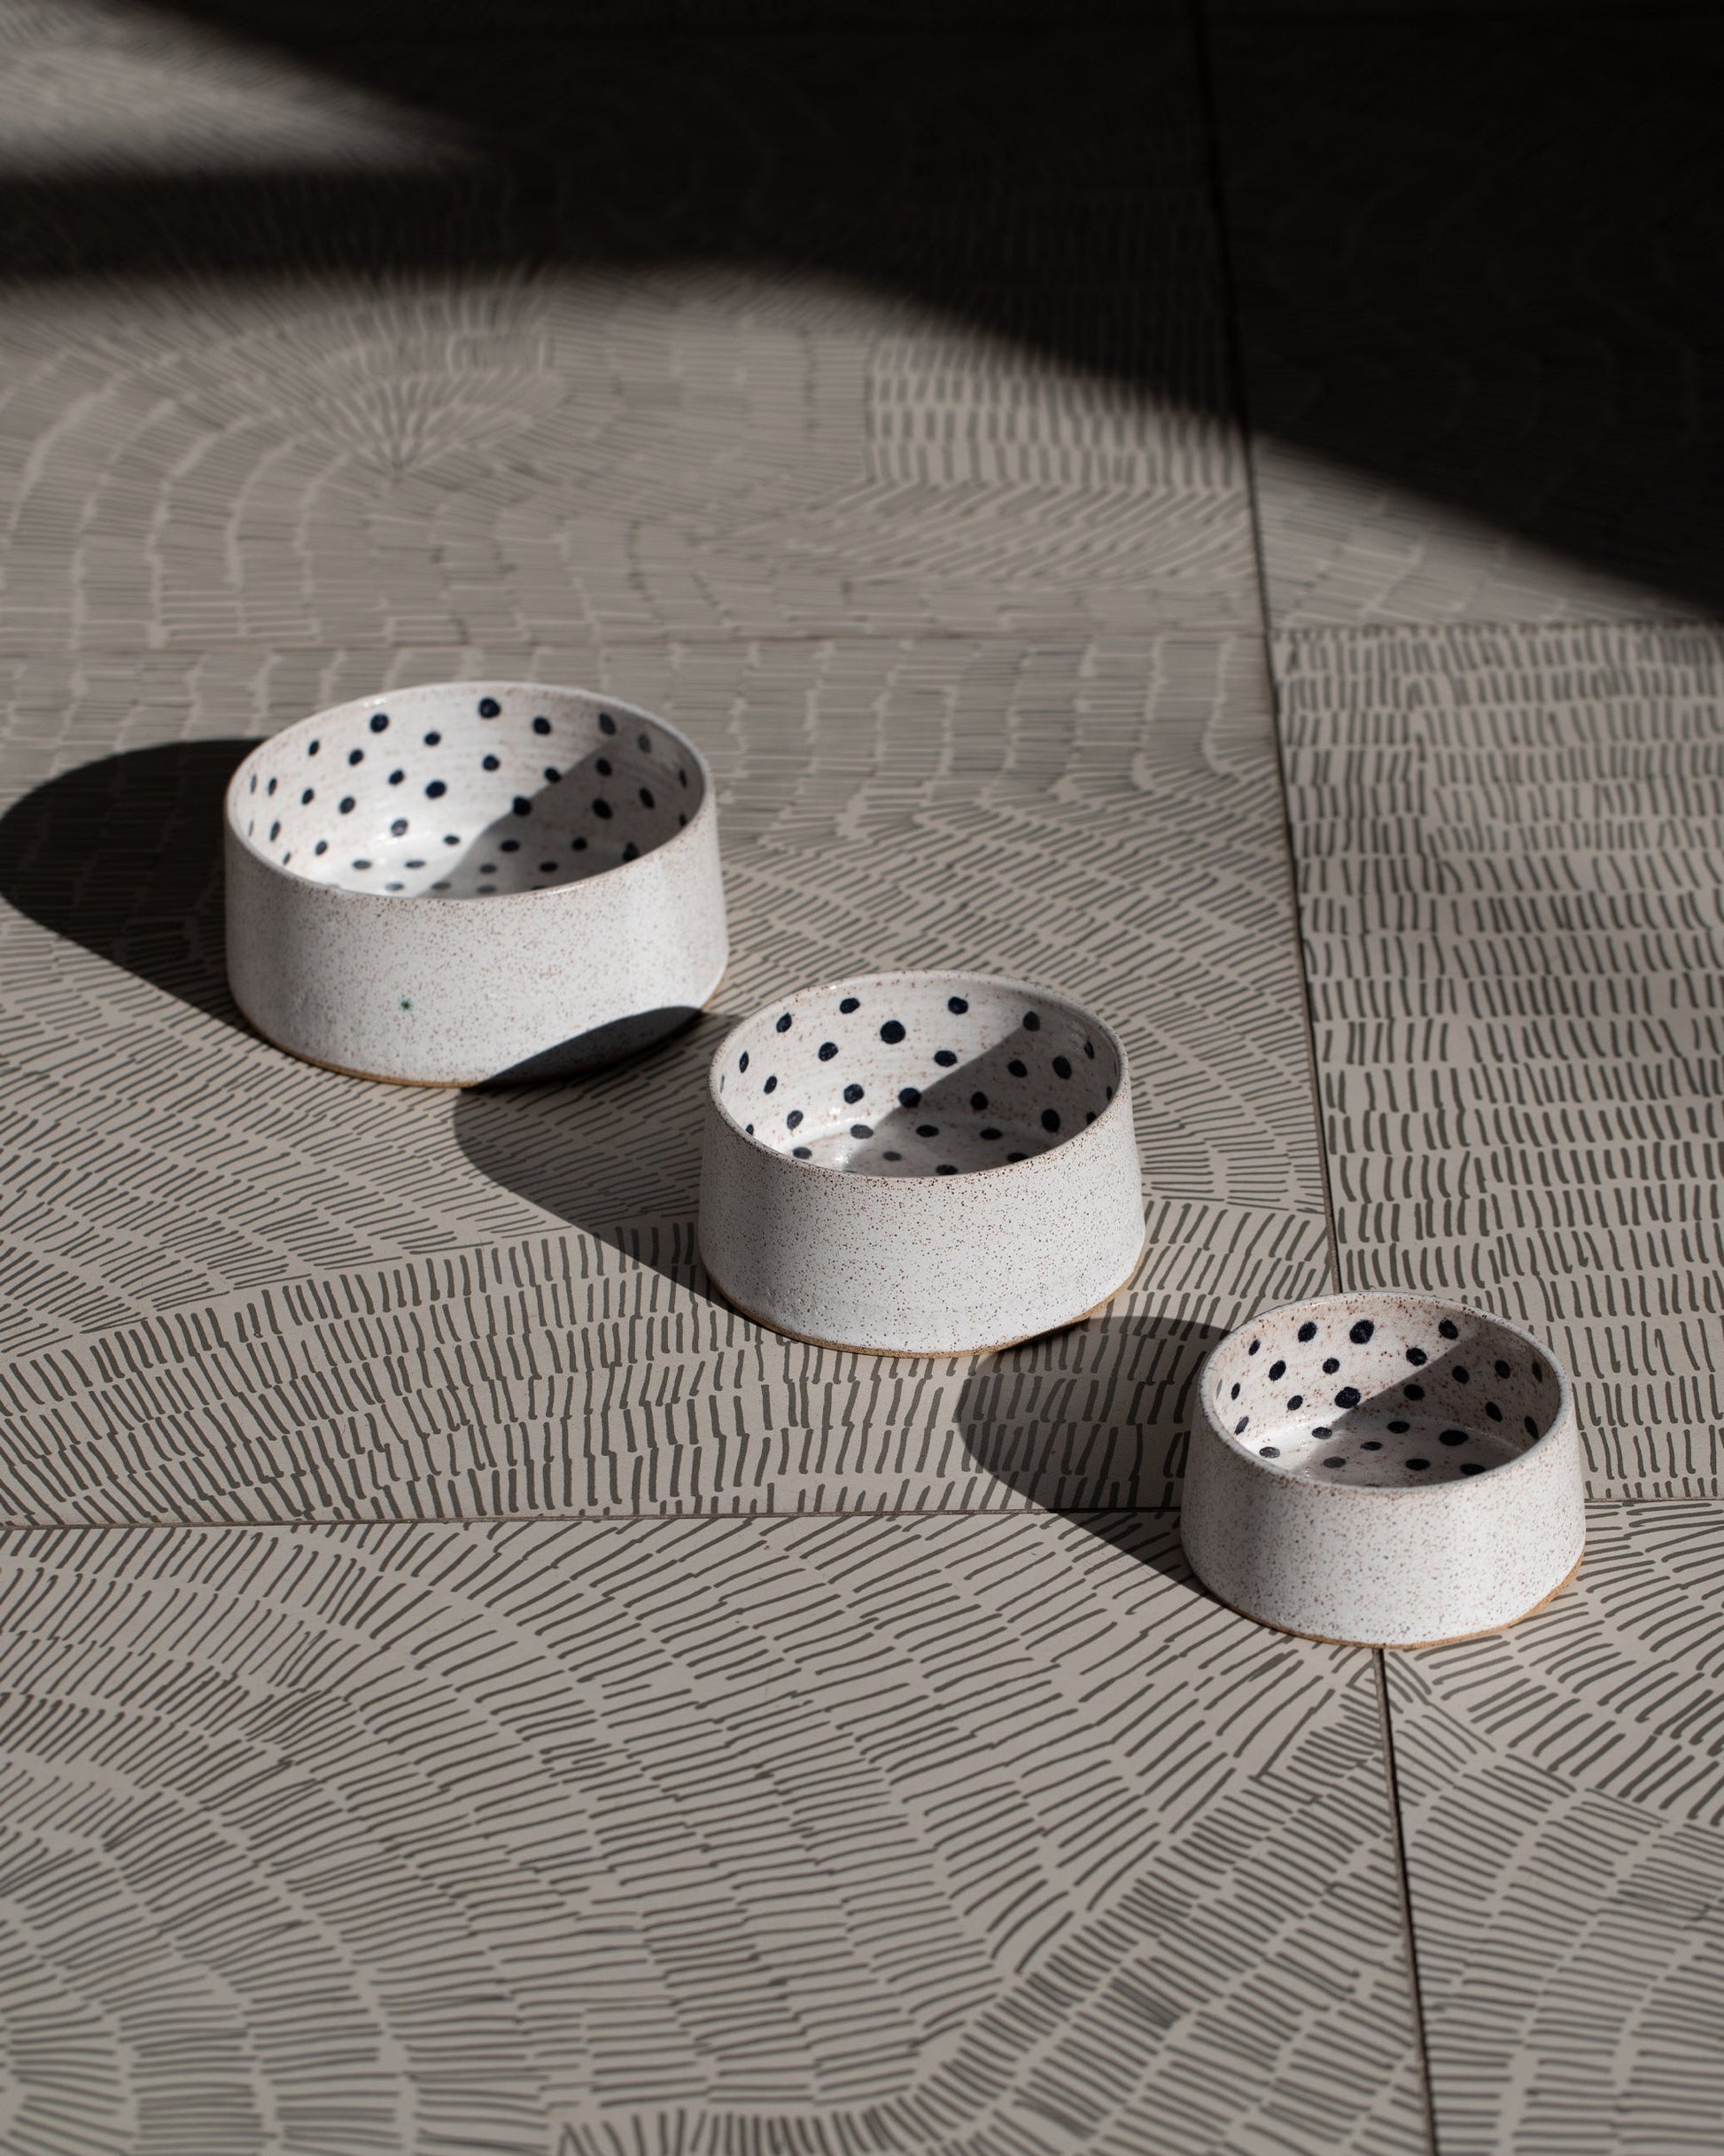 Styled image featuring Recreation Center Small, Medium, and Large Dog Bowls.